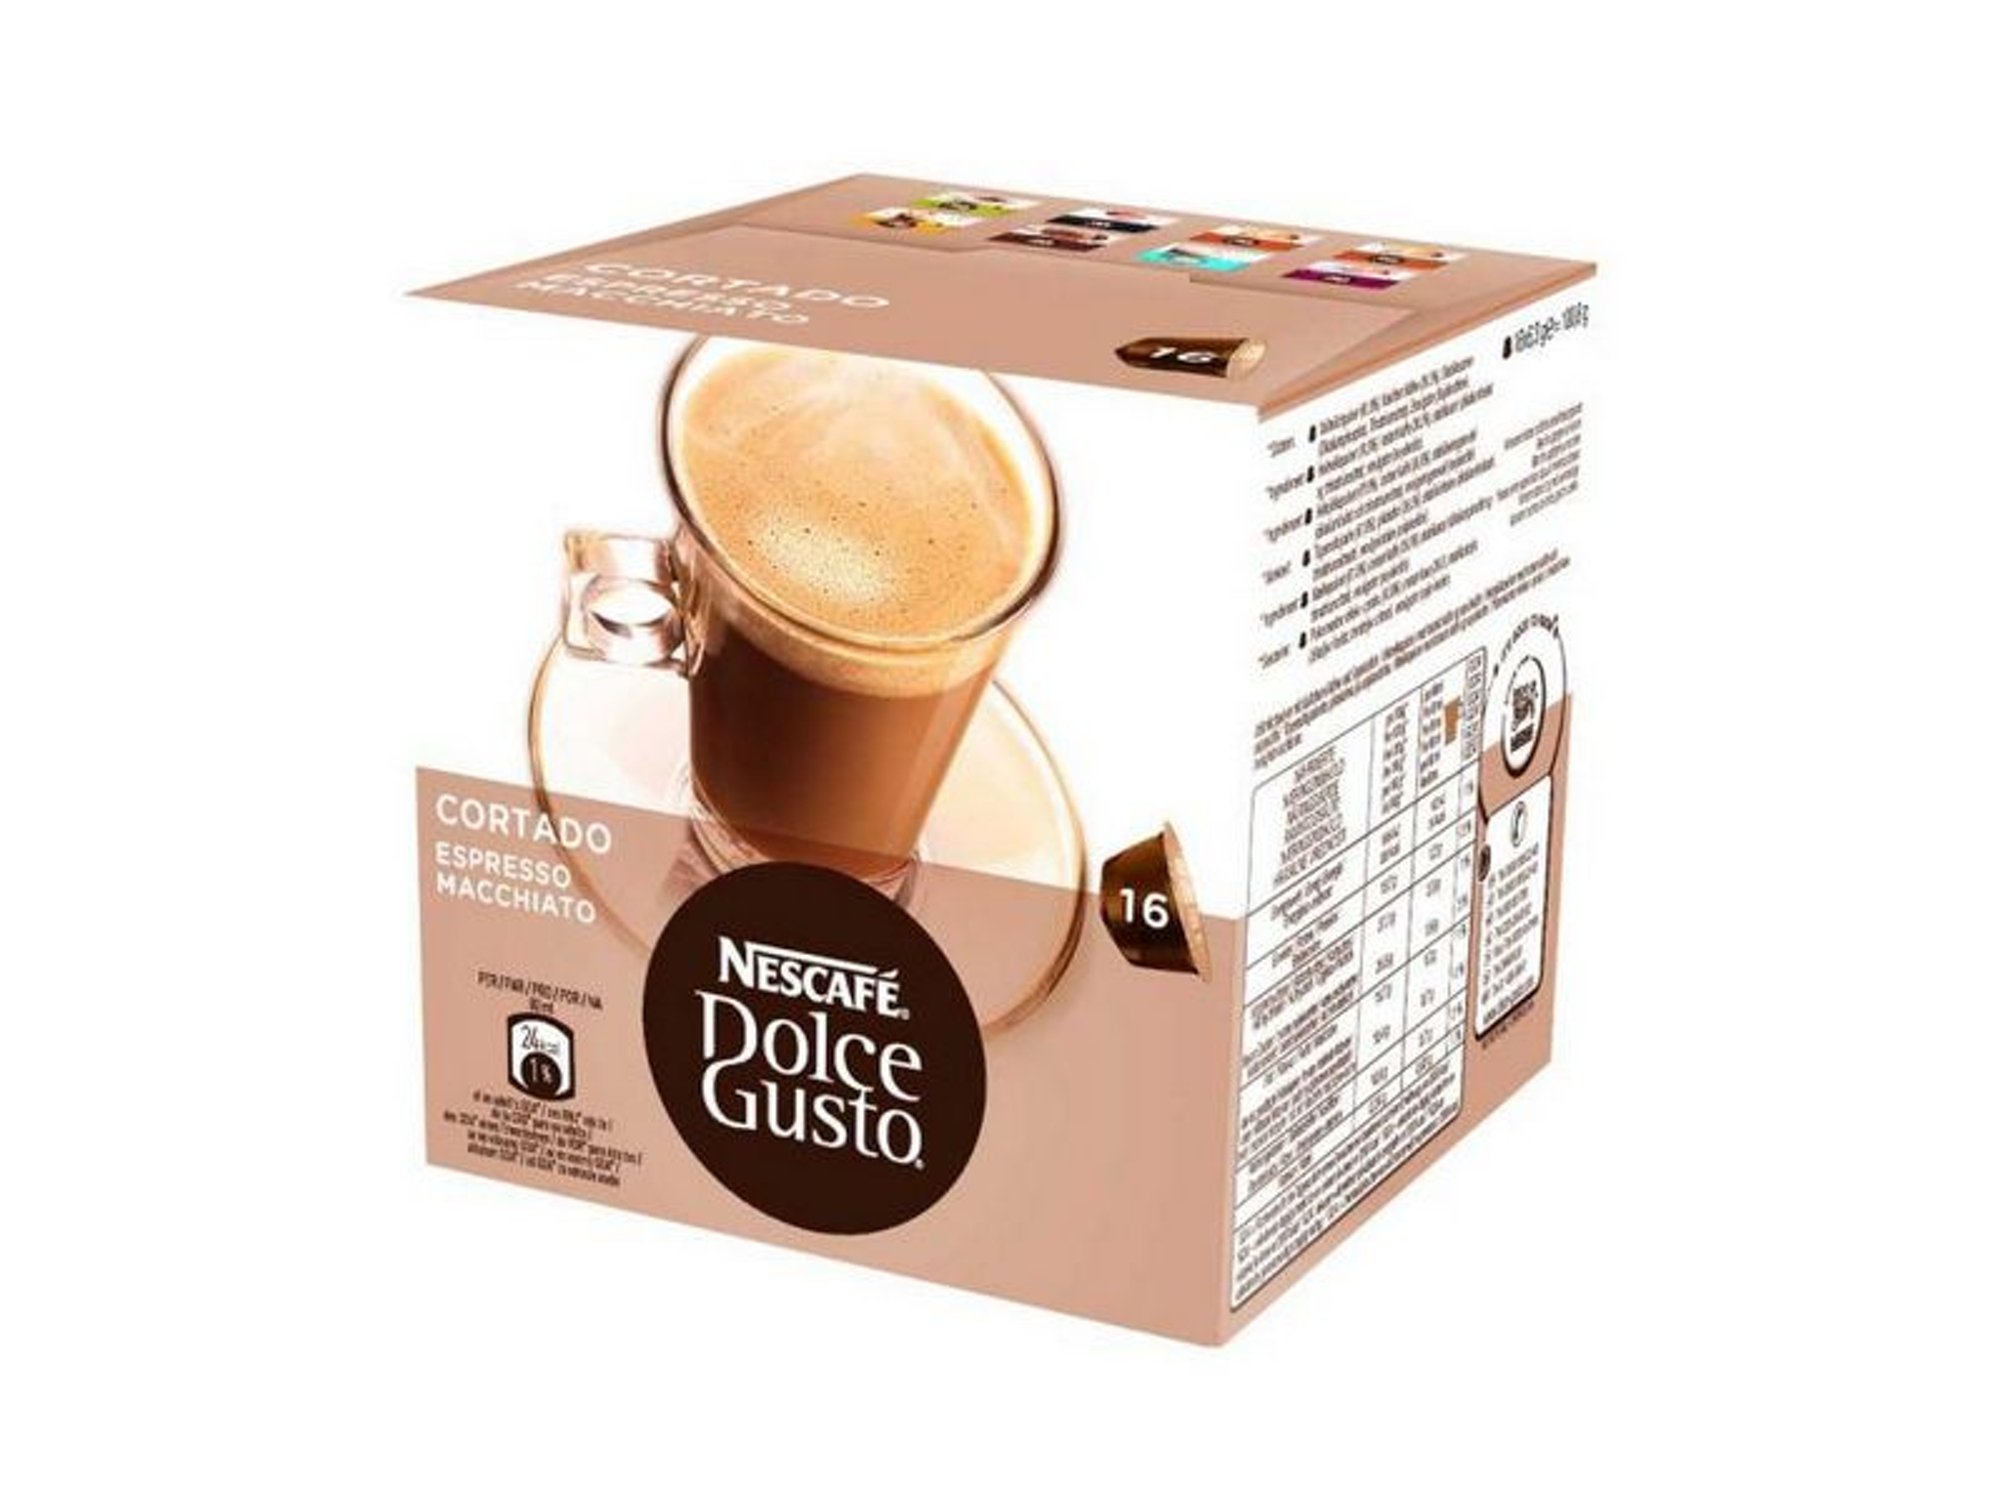 DOLCE GUSTO CAFE CORTADO 100g. 16ud.